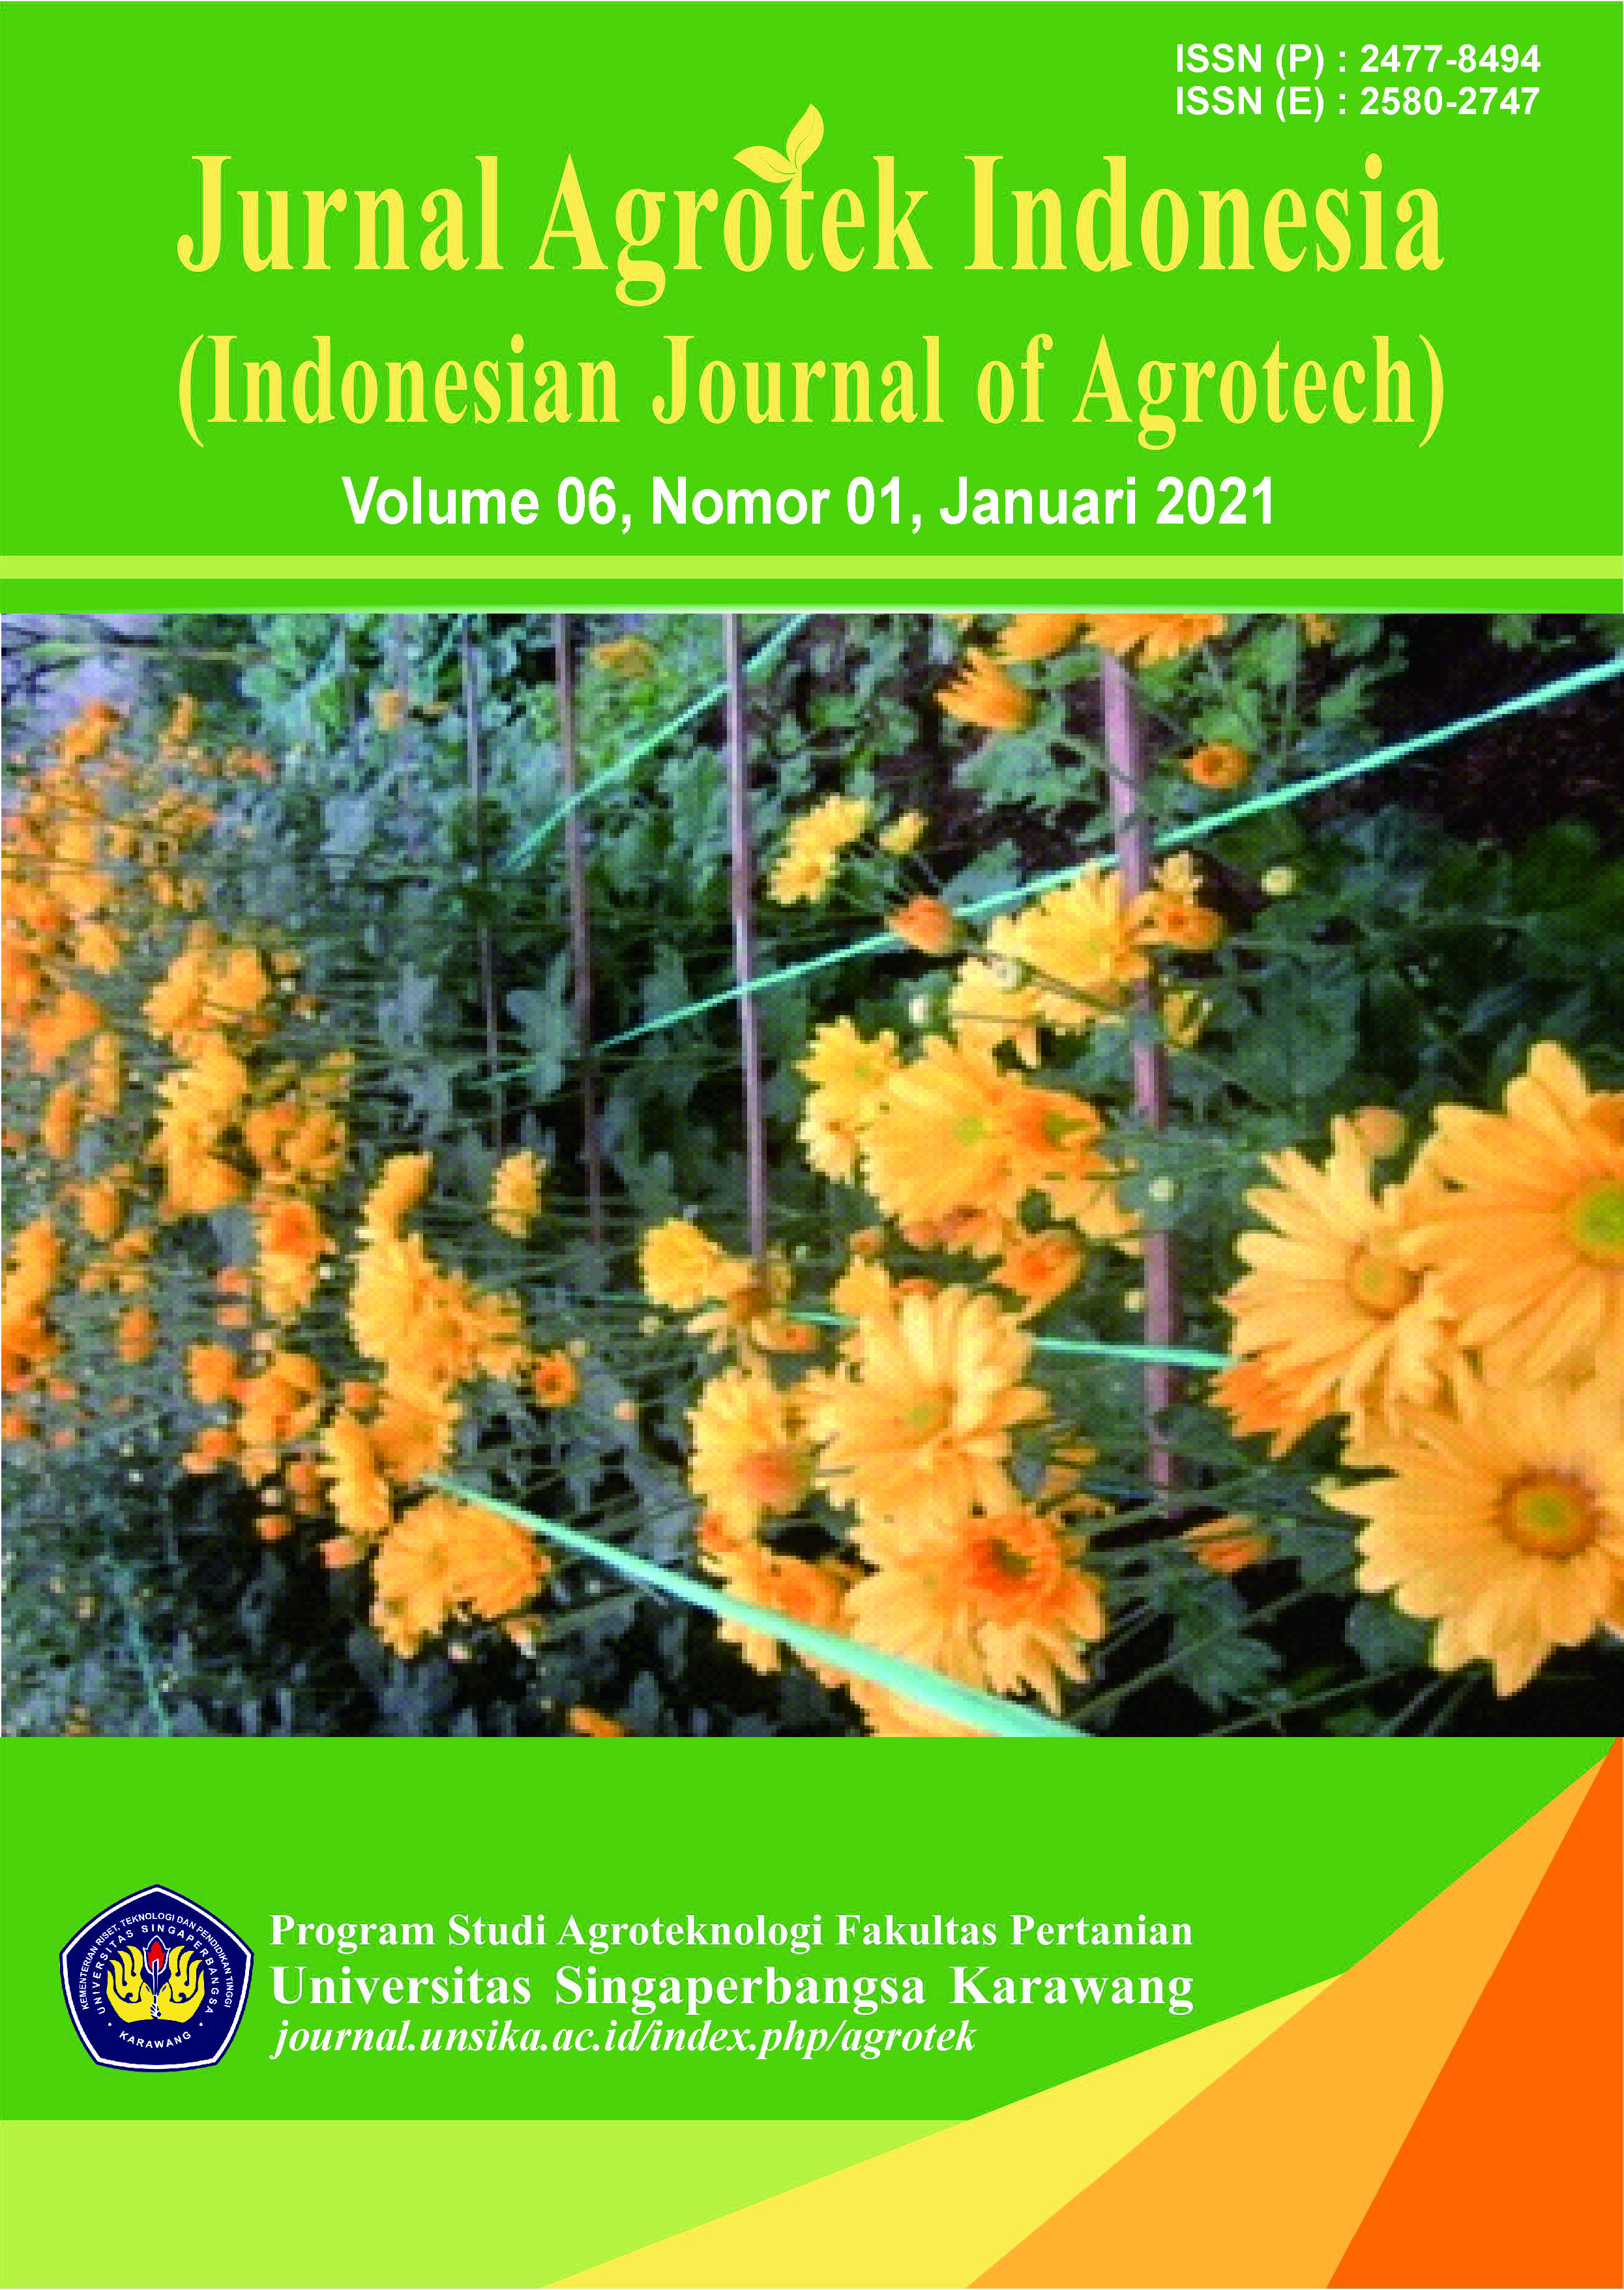 					View Vol. 6 No. 1 (2021): Jurnal Agrotek Indonesia (Indonesian Journal of Agrotech)
				